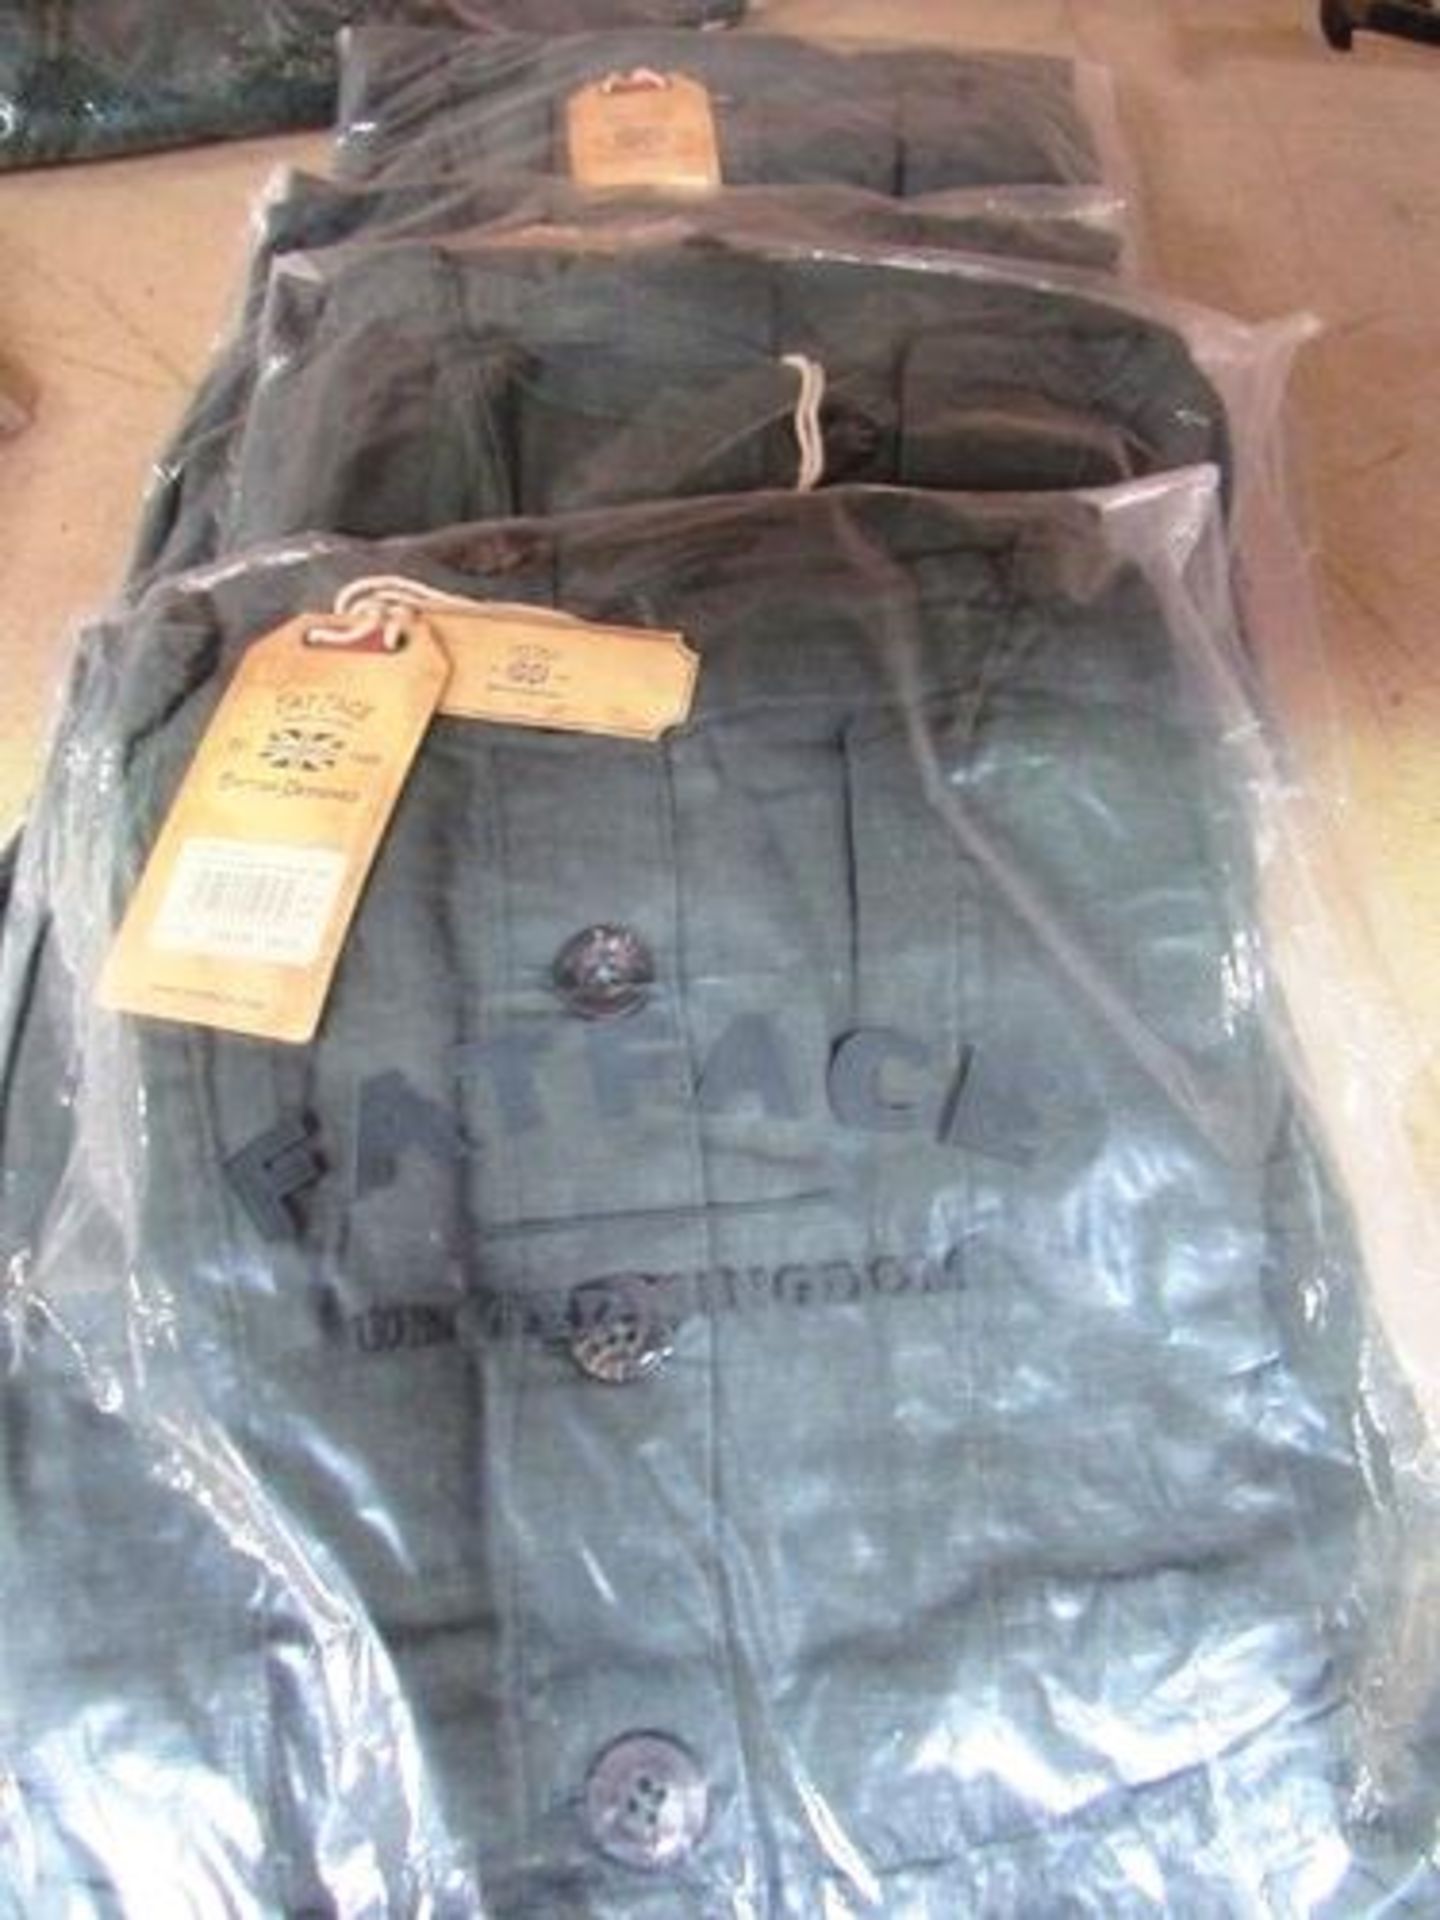 4 x Fat Face Aubrey Dresses 2 size 10 and 2 size 12 - sealed new in pack (EB3B)